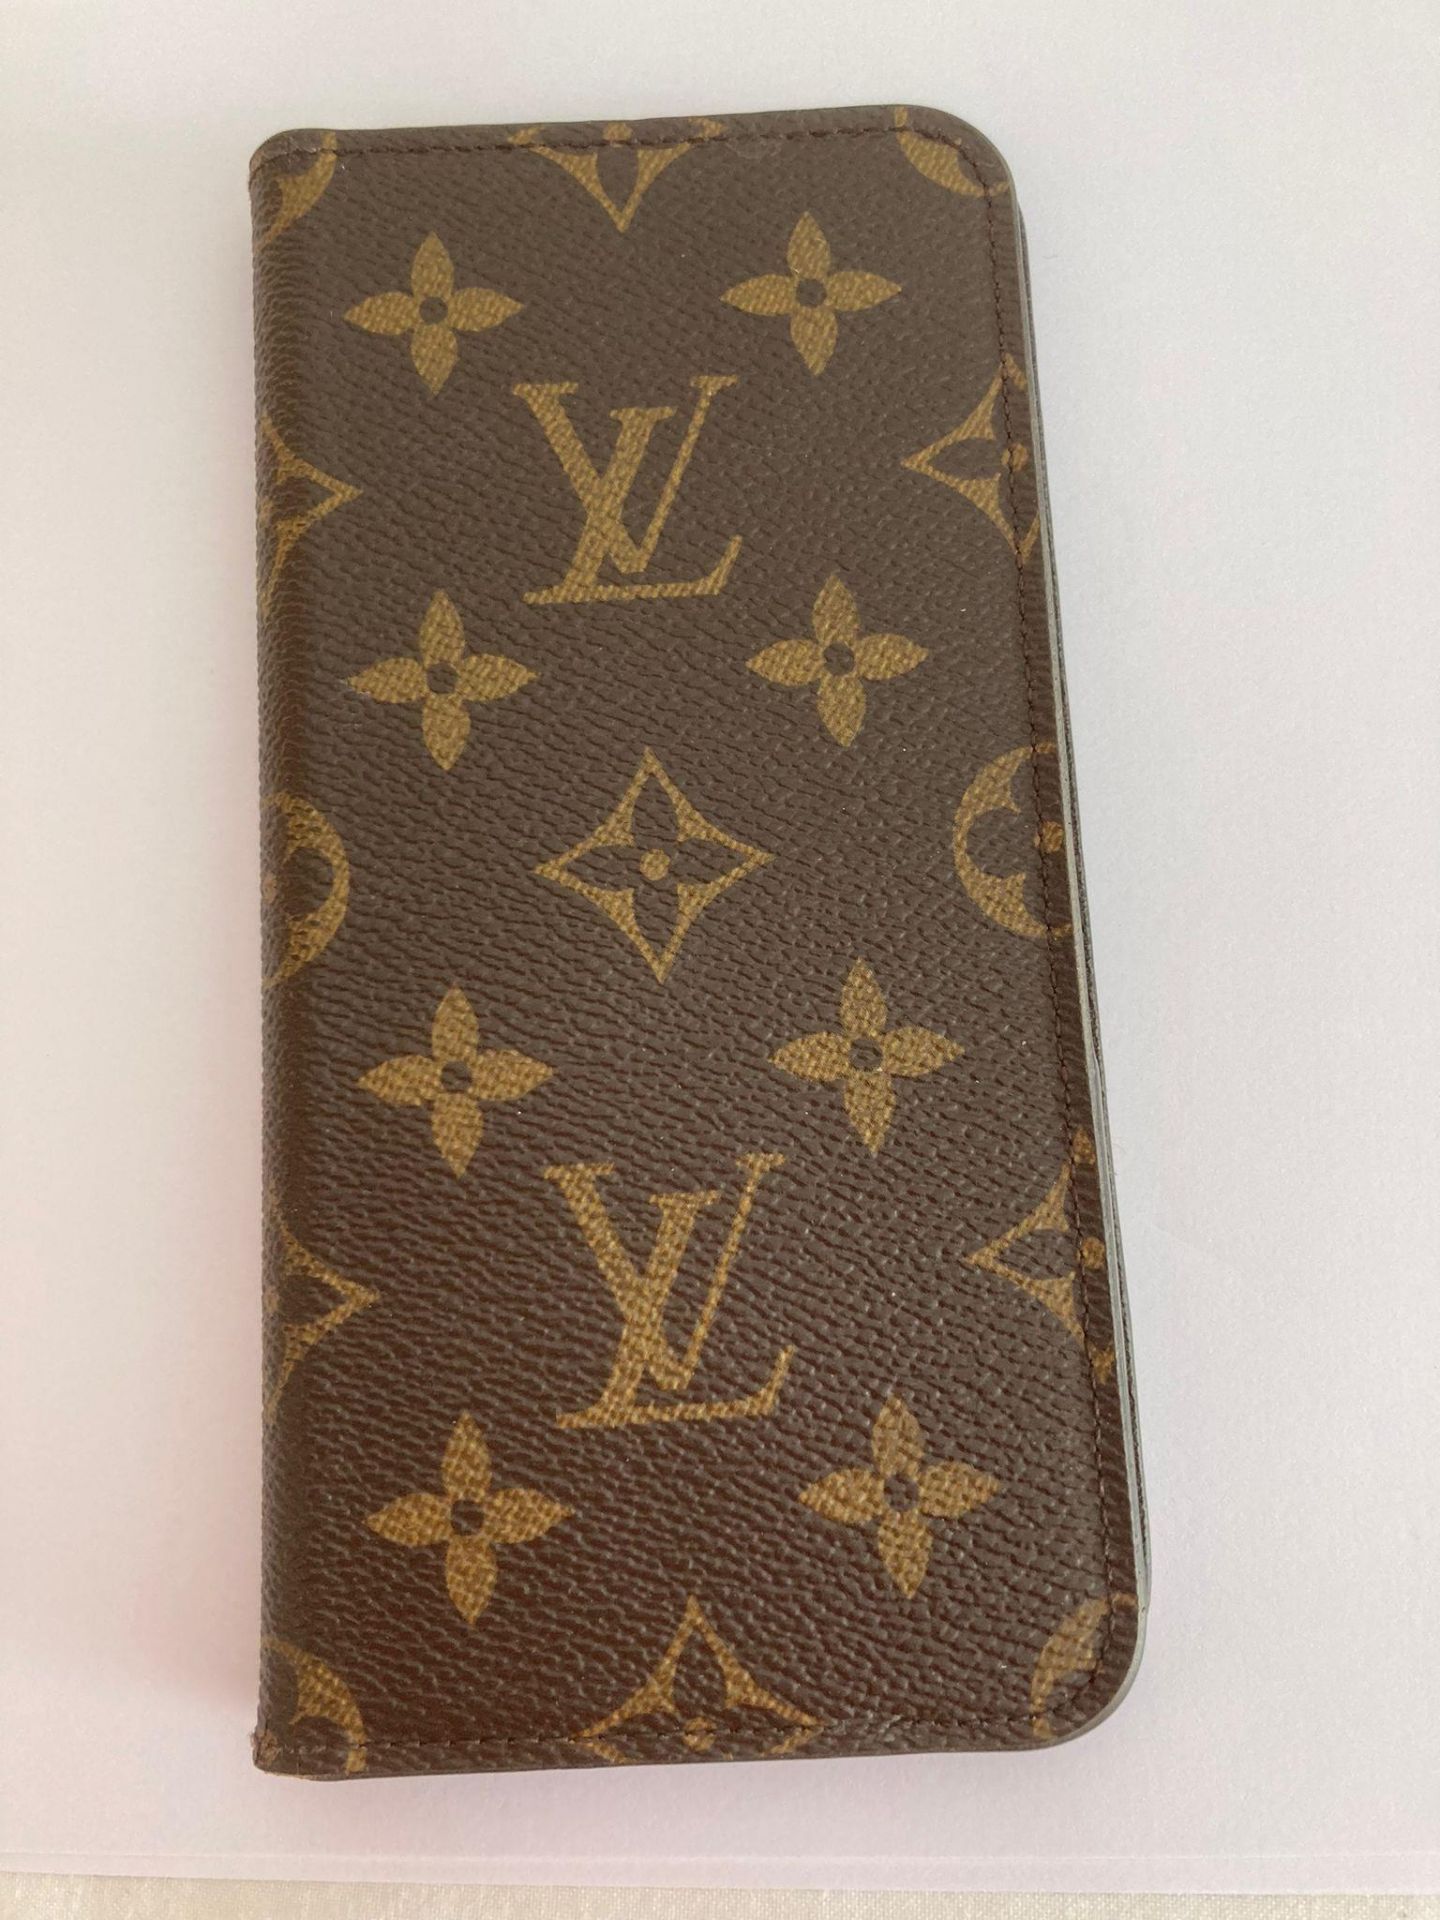 Genuine LOUIS VUITTON folio phone case for iPhone 7 or similar. Finished in brown leather with the